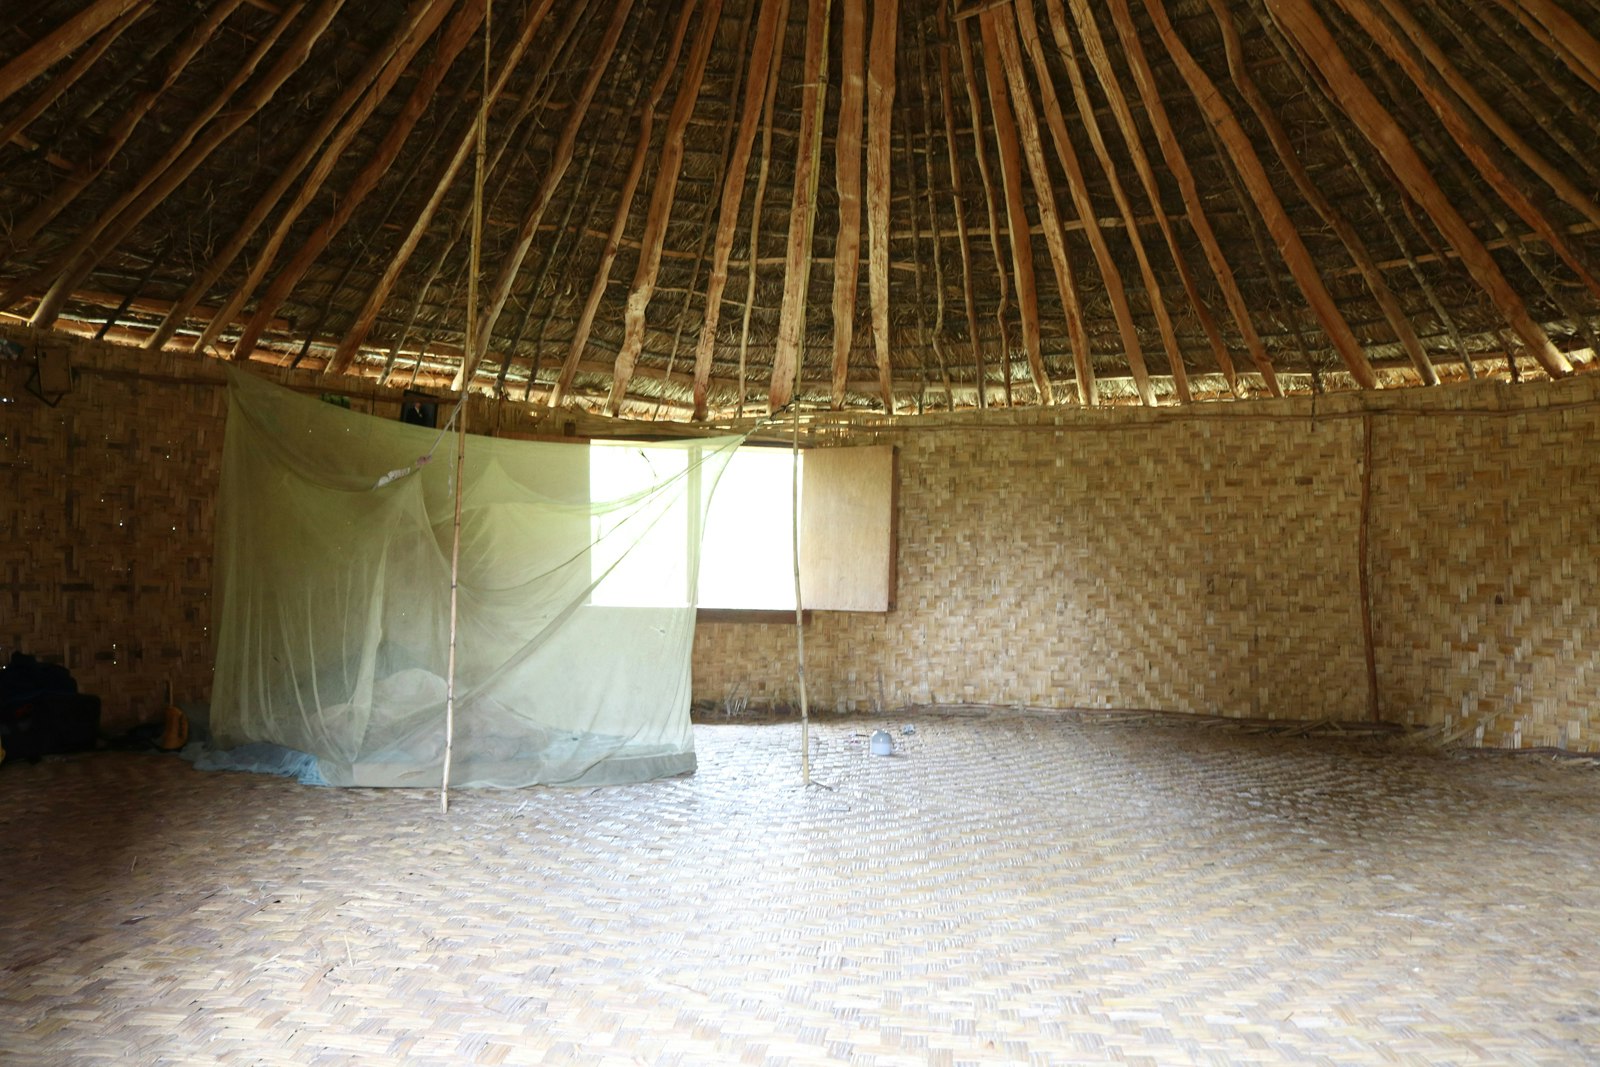 Inside the central room of a grass hut with a pointed roof. The walls and floor are woven from fibre, and there is a window cut into one of the walls.